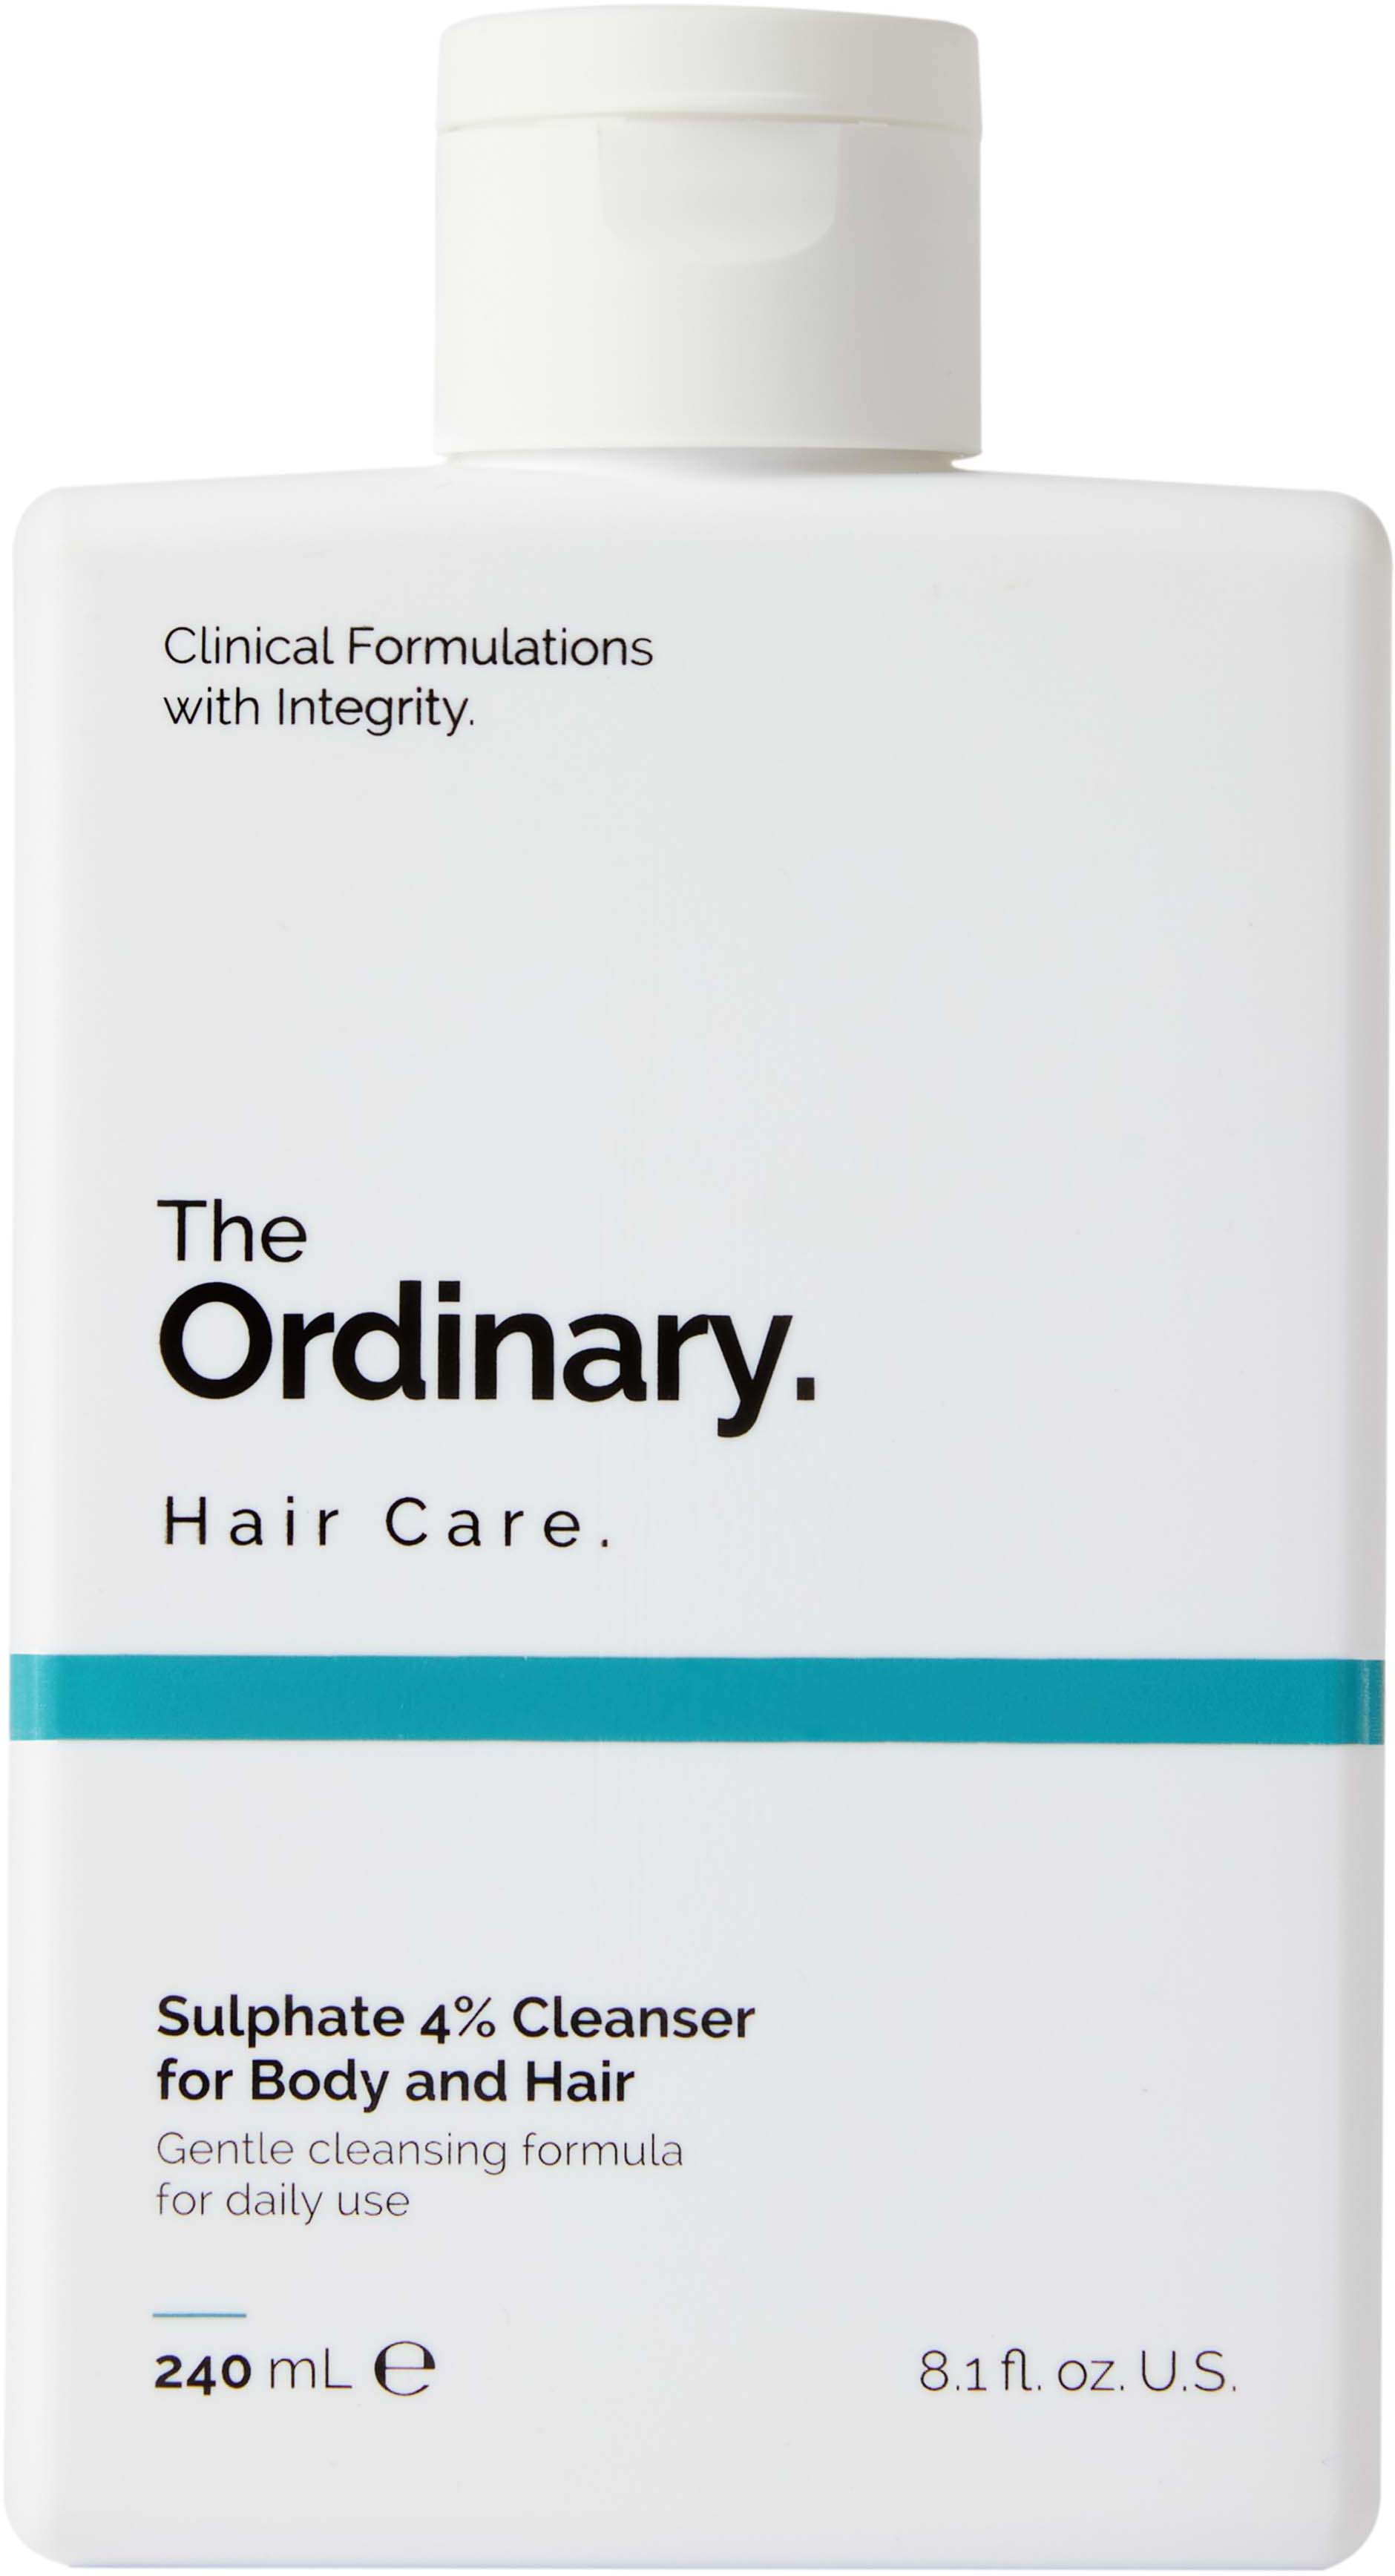 The Ordinary Hair Care 4% Sulphate Cleanser for Body and Hair 240 ml |  lyko.com